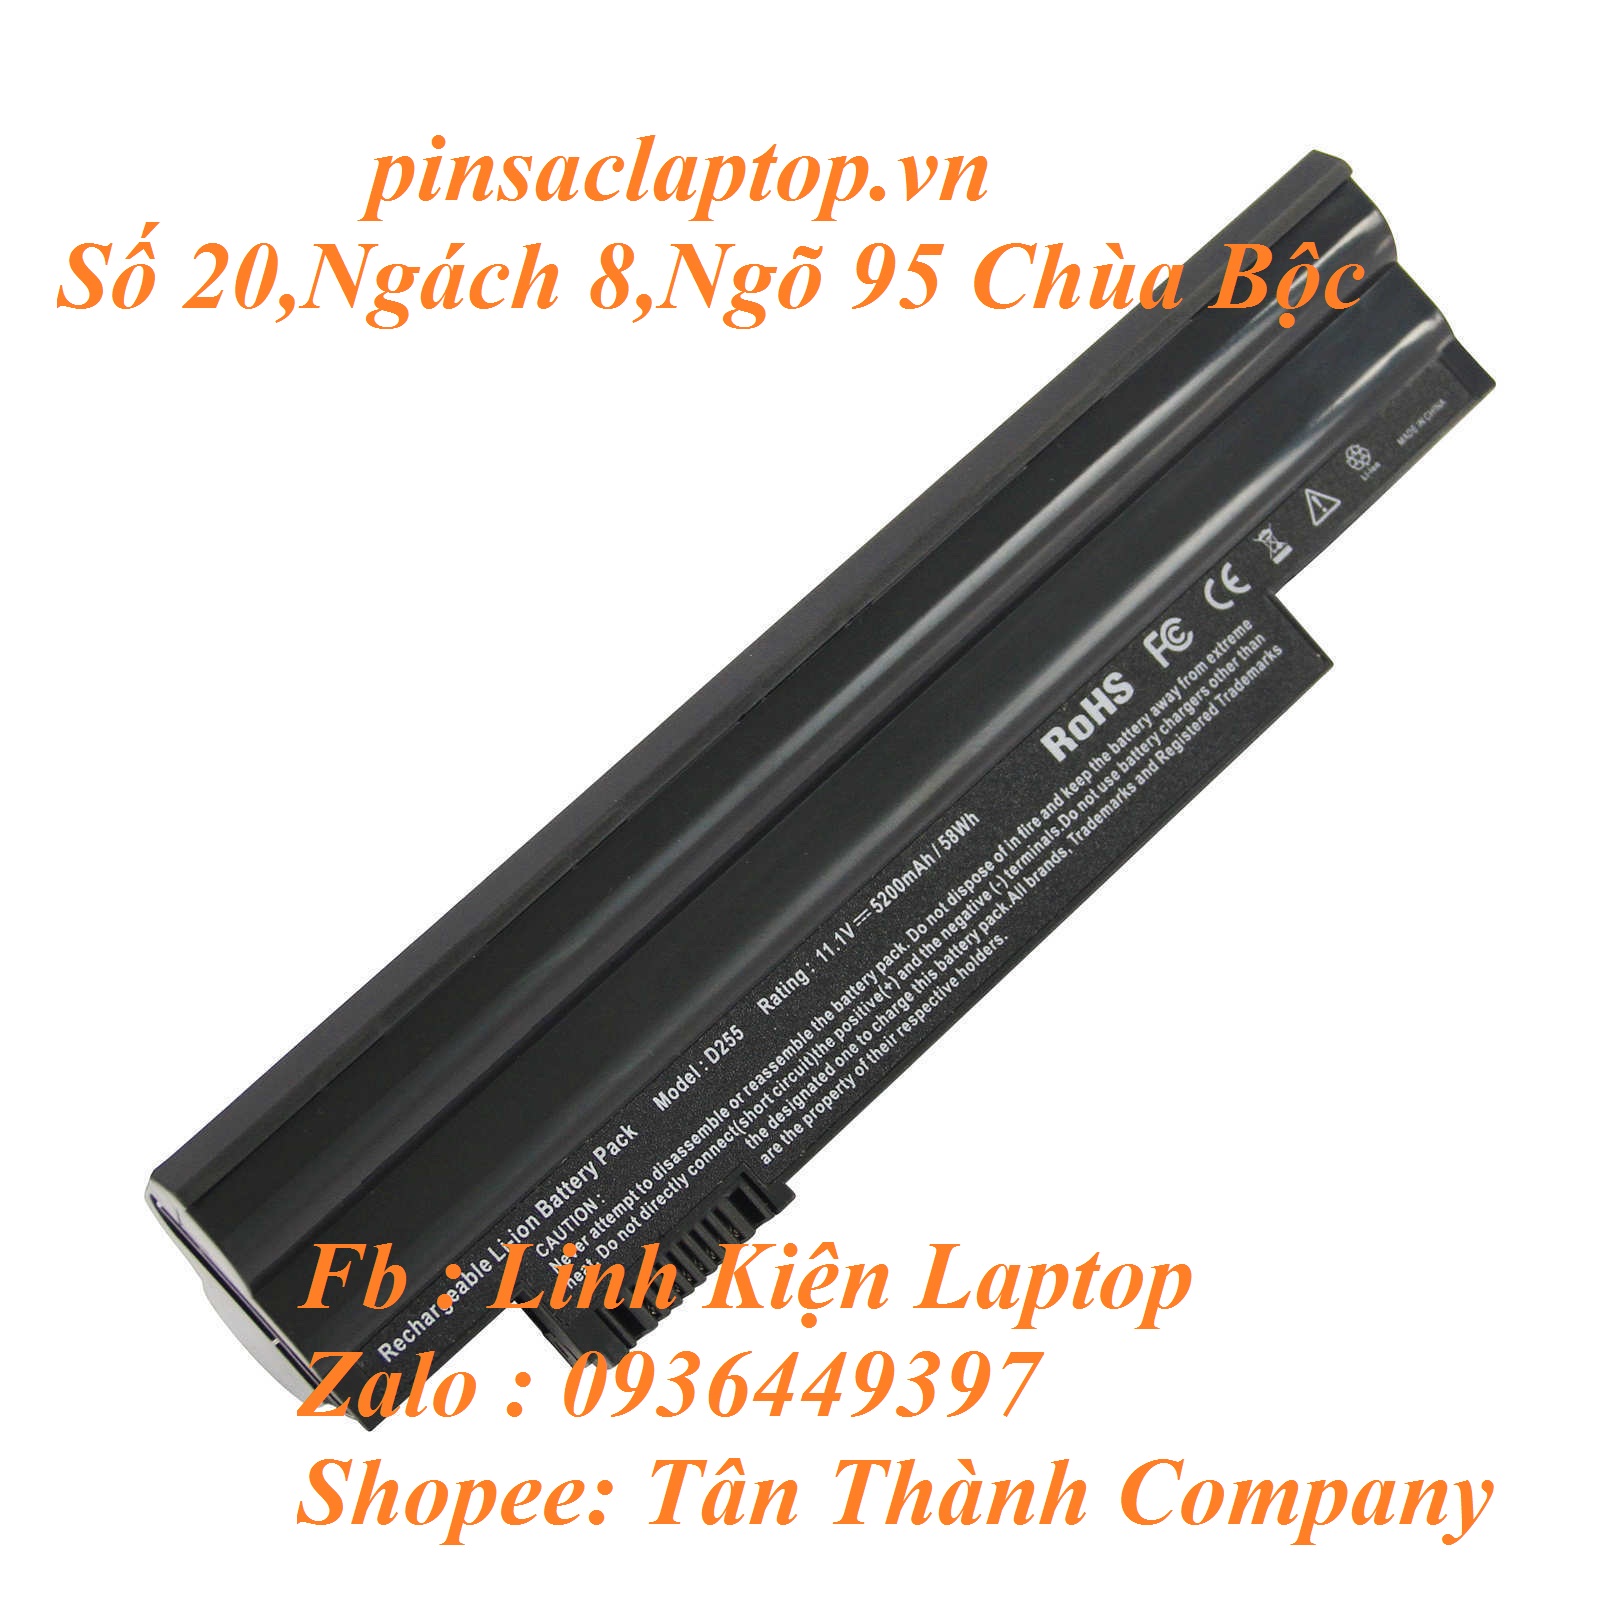 Pin - Battery for ACER Aspire one 522 722 D255 D255E